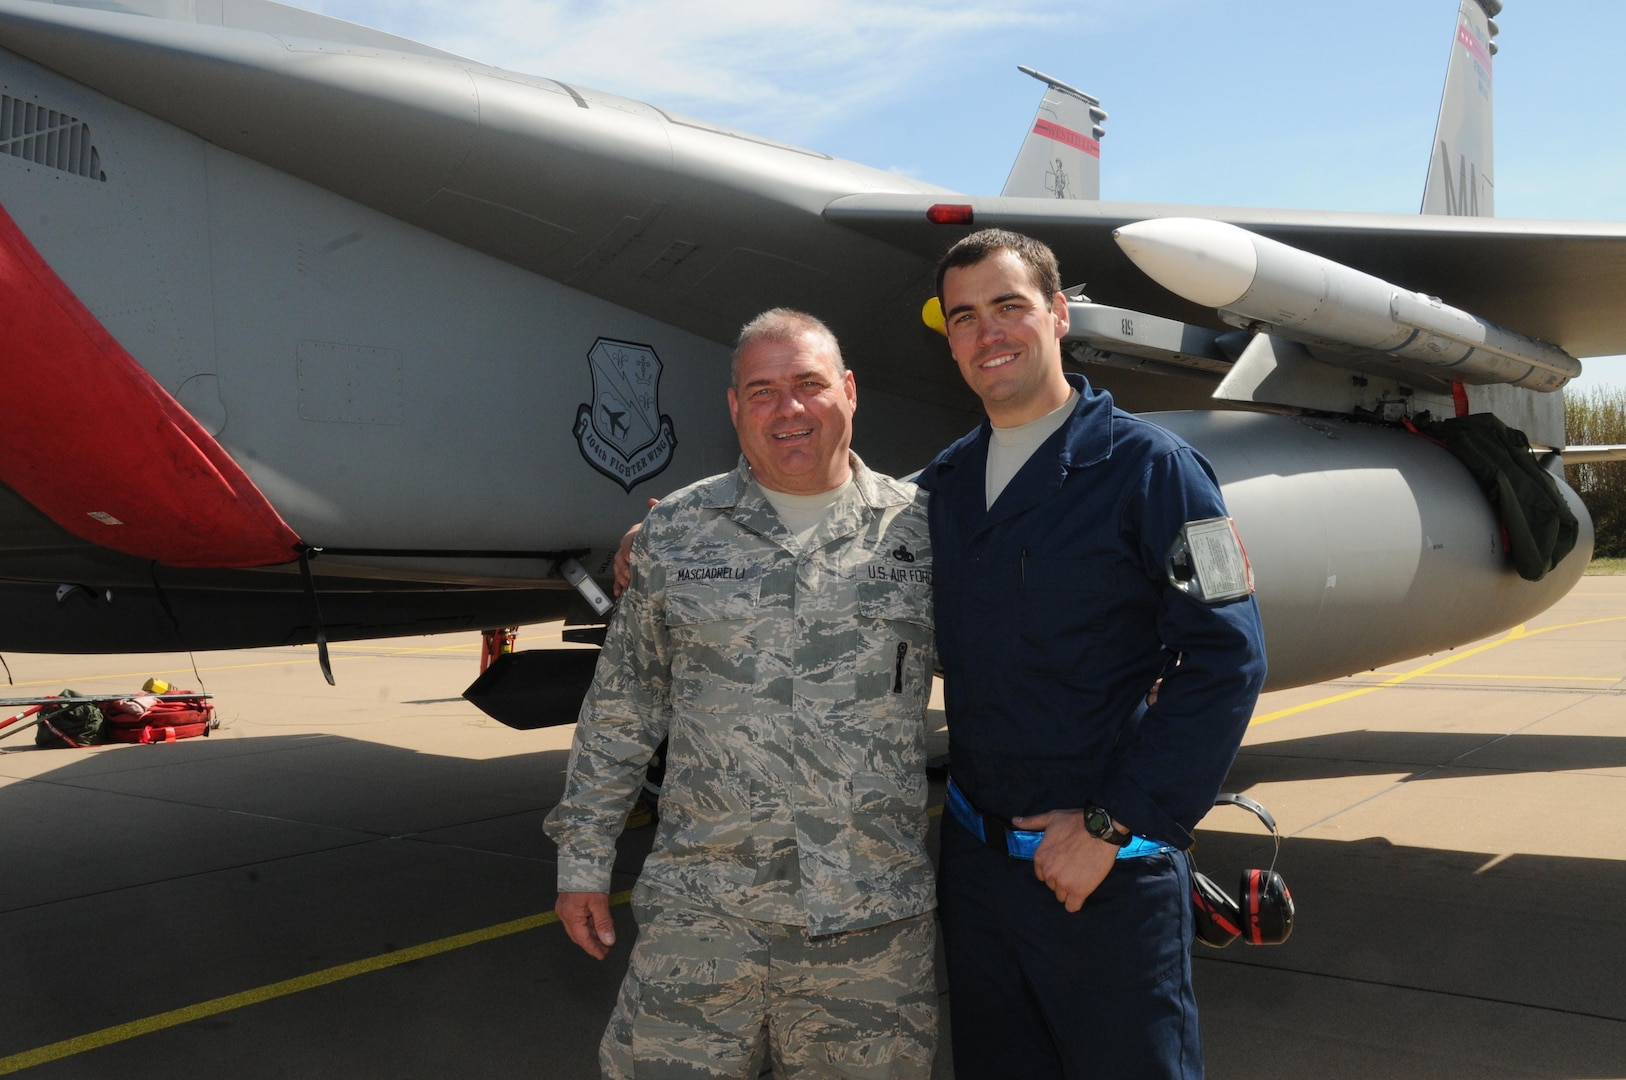 U.S. Air Force and Air National Guard Master Sgt. Donny Masciadrelli, 104th Fighter Wing avionics technician, and his son, Tech. Sgt. Danny Masciadrelli, 104th Fighter Wing F-15 crew chief, deploy together for the first time for an F-15C/D Eagle mission to the Netherlands in April 2016. They are deployed in support of Operation Atlantic Resolve along with more than 250 Airmen from the 104th as part of a theater security package, strengthening relationships and training alongside NATO allies throughout Europe.